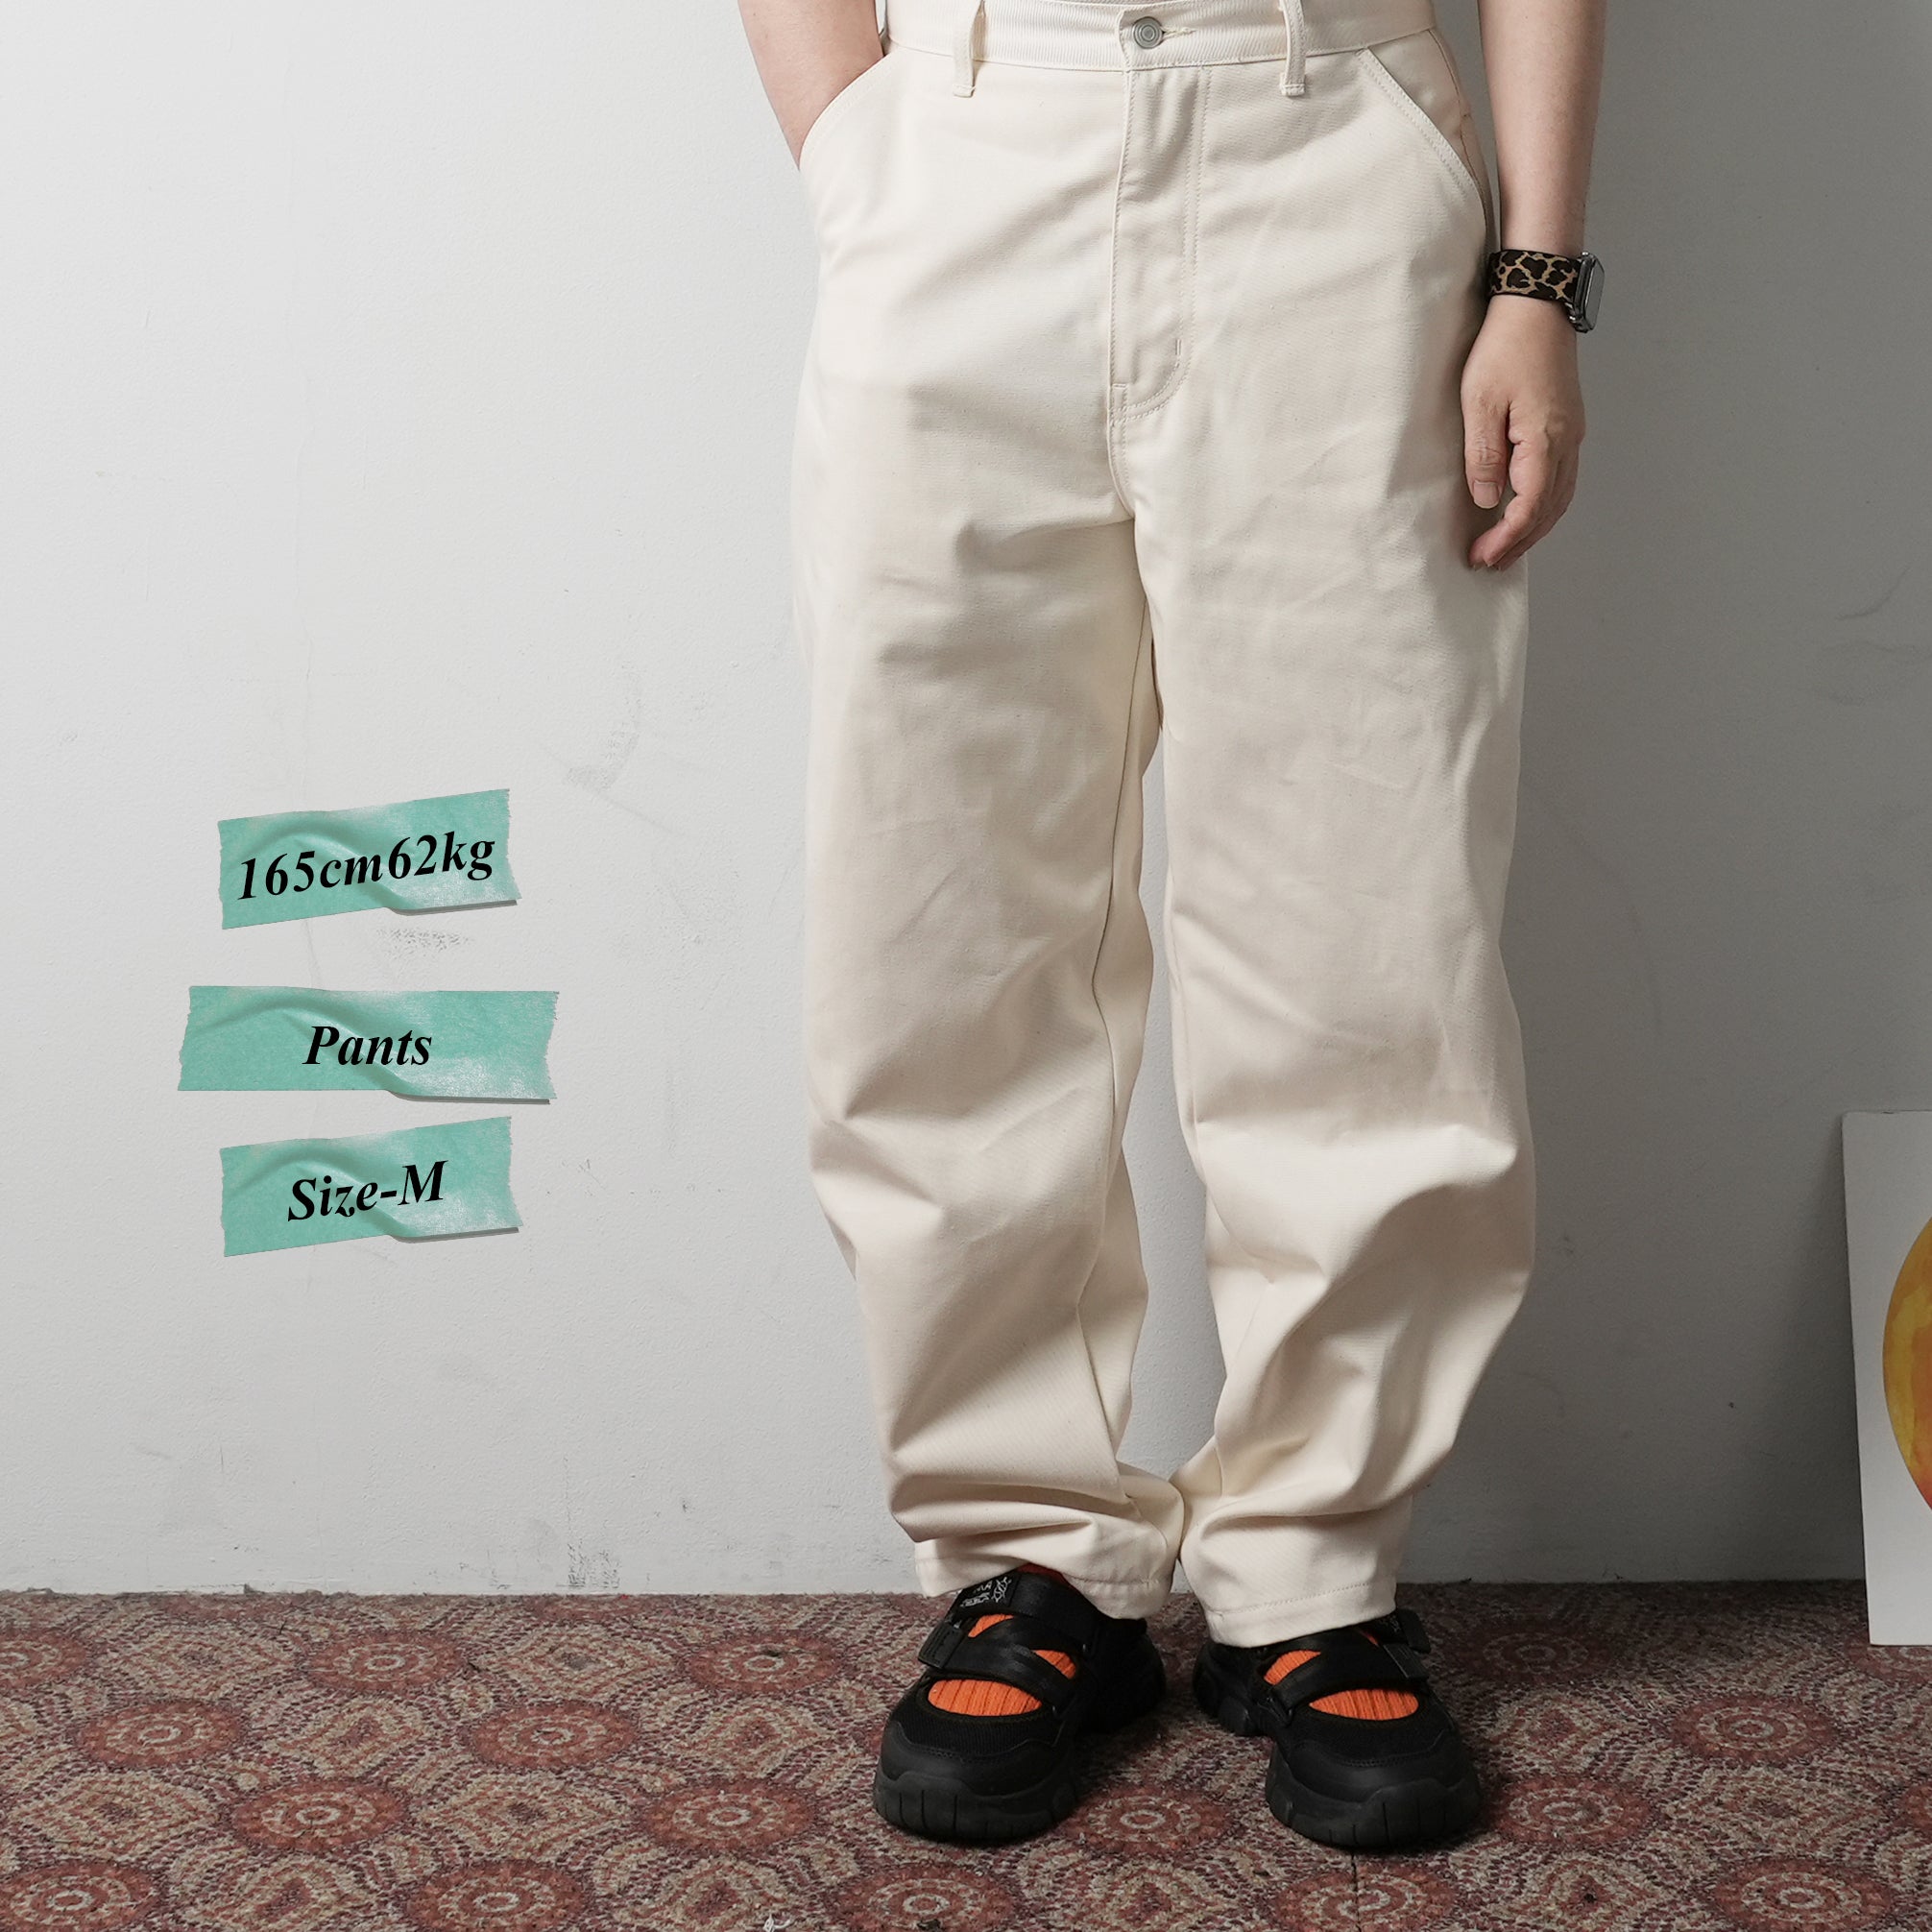 Name: YING-YANG WORK PANTS | Color: Natural/Green | Size: S/M/L【CITYLIGHTS PRODUCTS_シティライツプロダクツ】